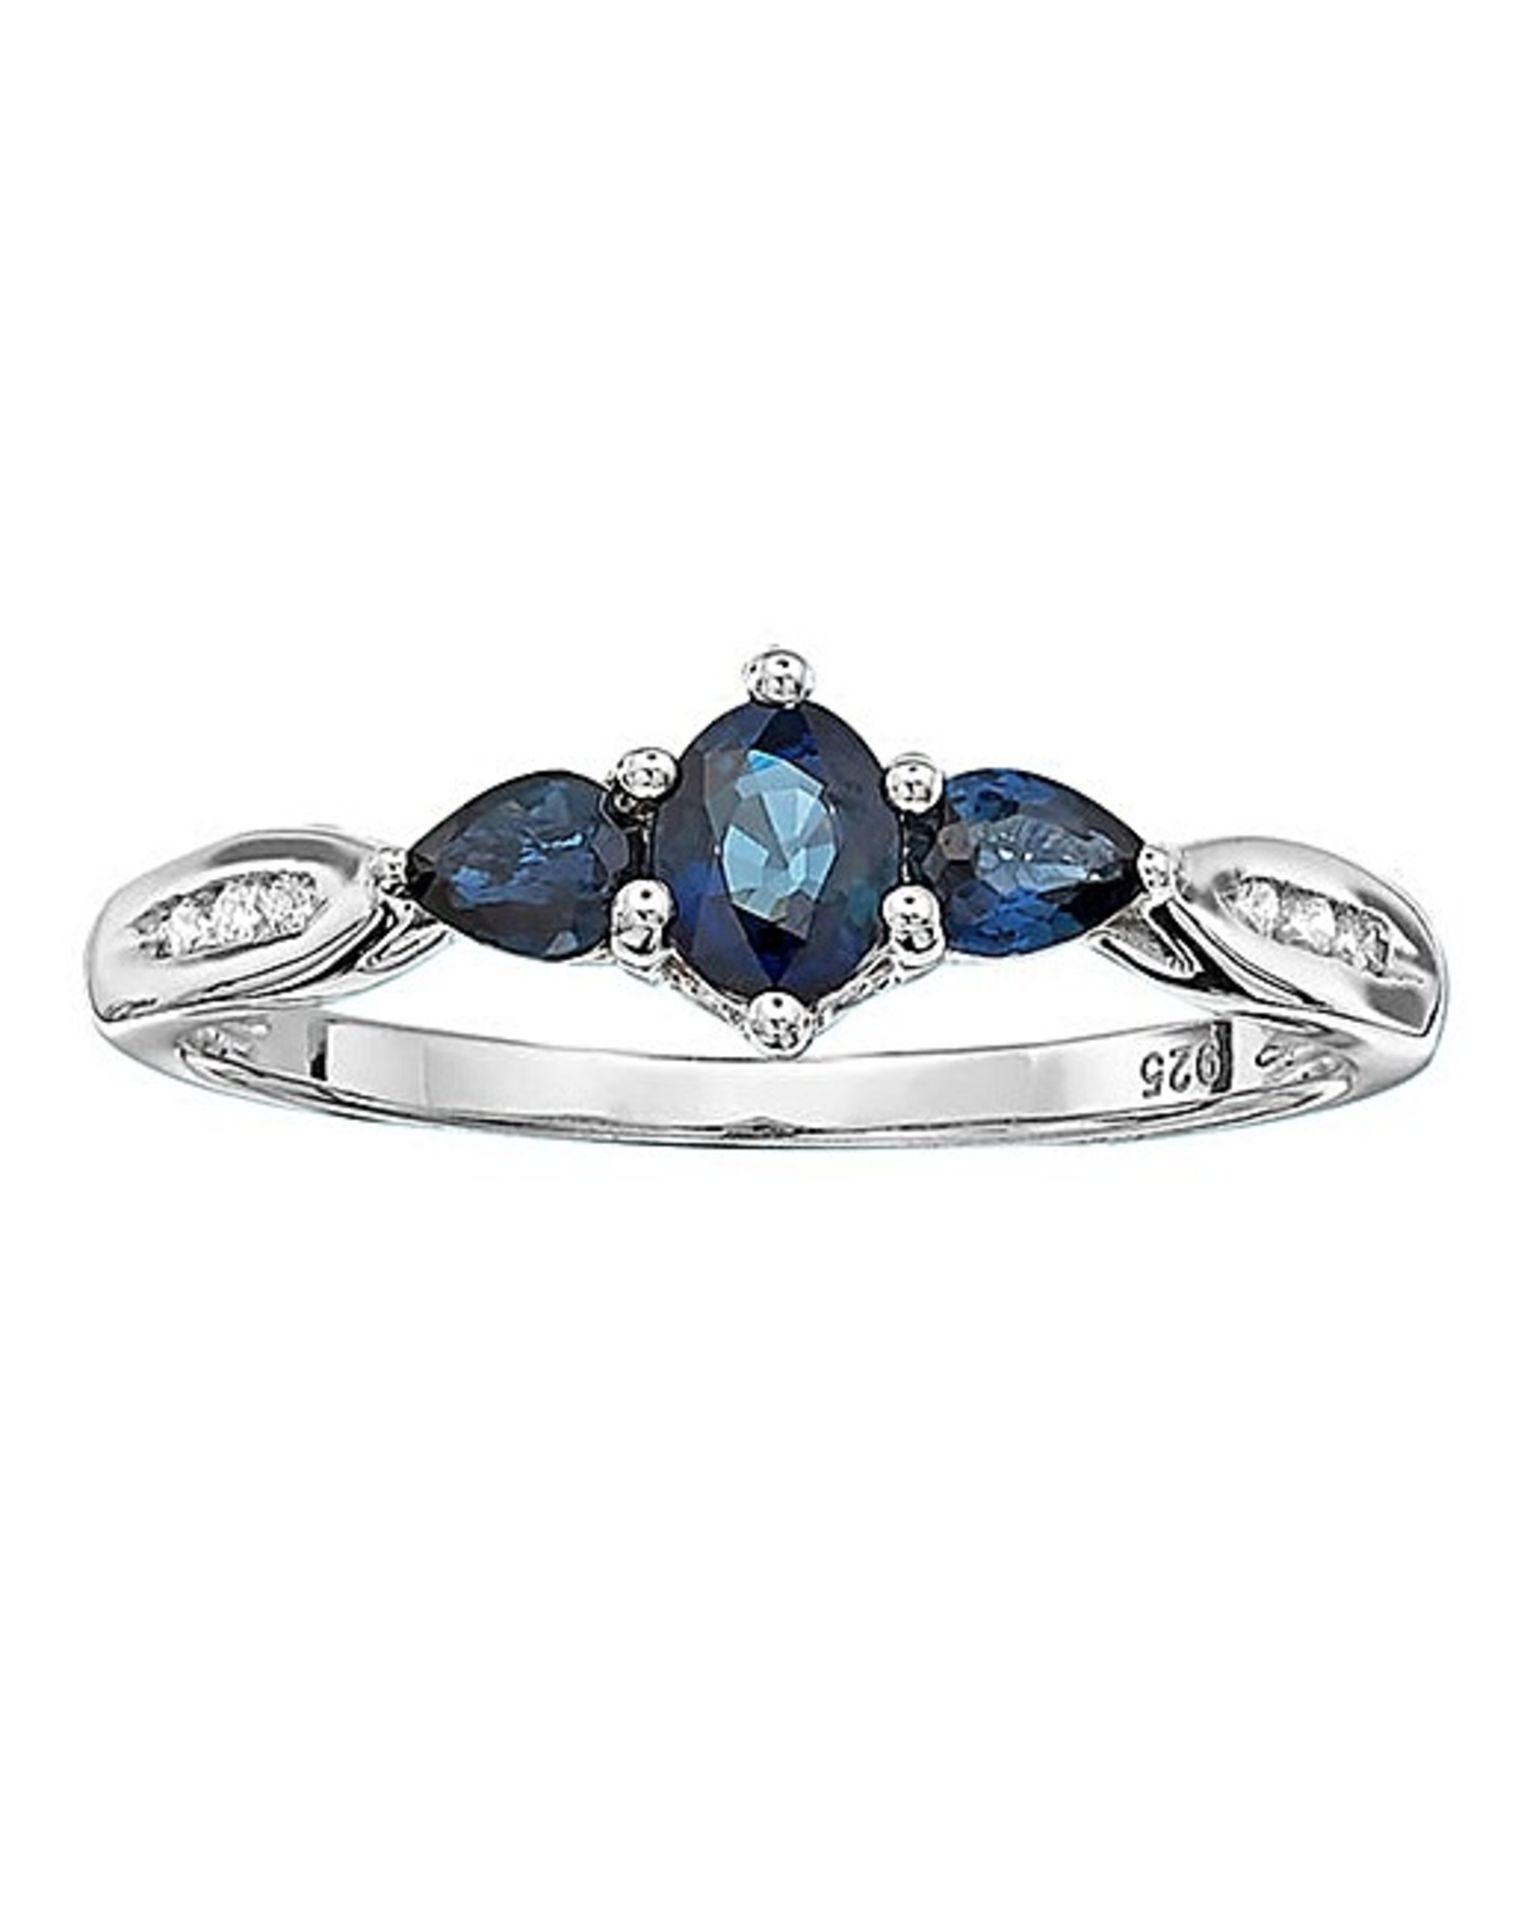 This stunning 925 Solid Sterling Silver ring set with Sapphires & White Topaz is a beautiful piece